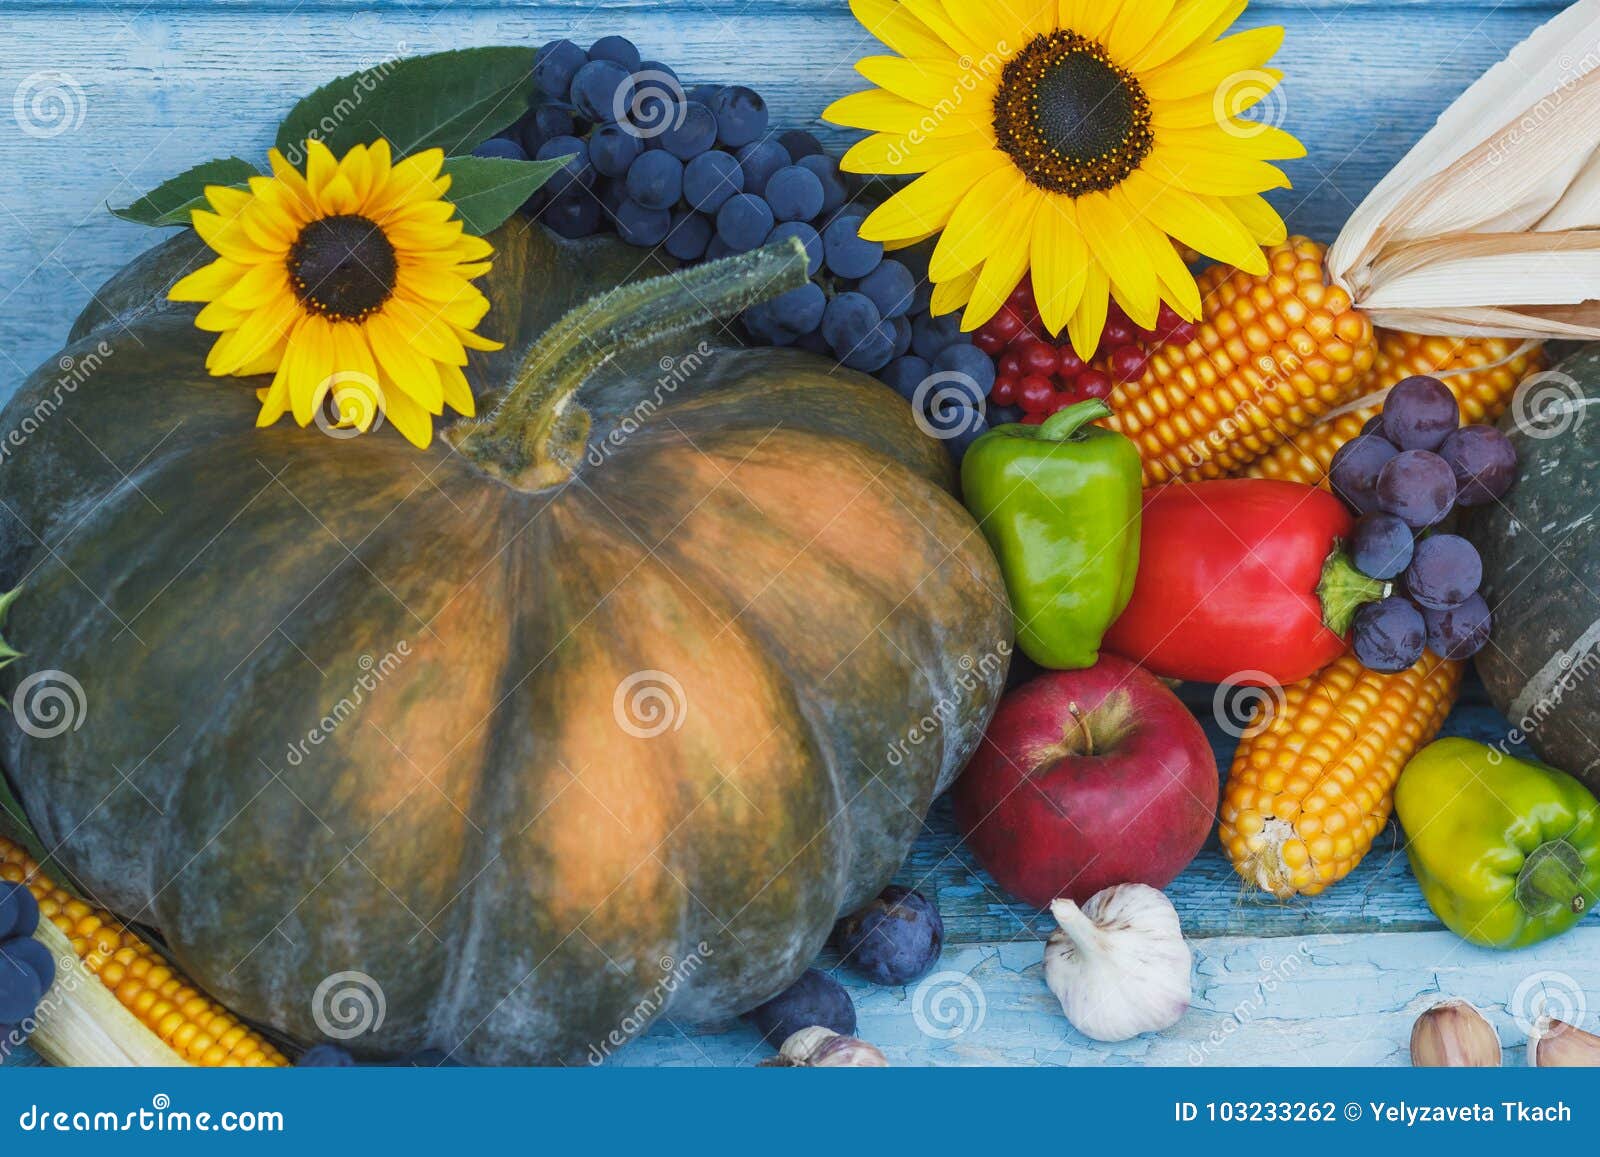 Pumpkin, Sunflowers and Different Ripe Vegetables Stock Photo - Image ...